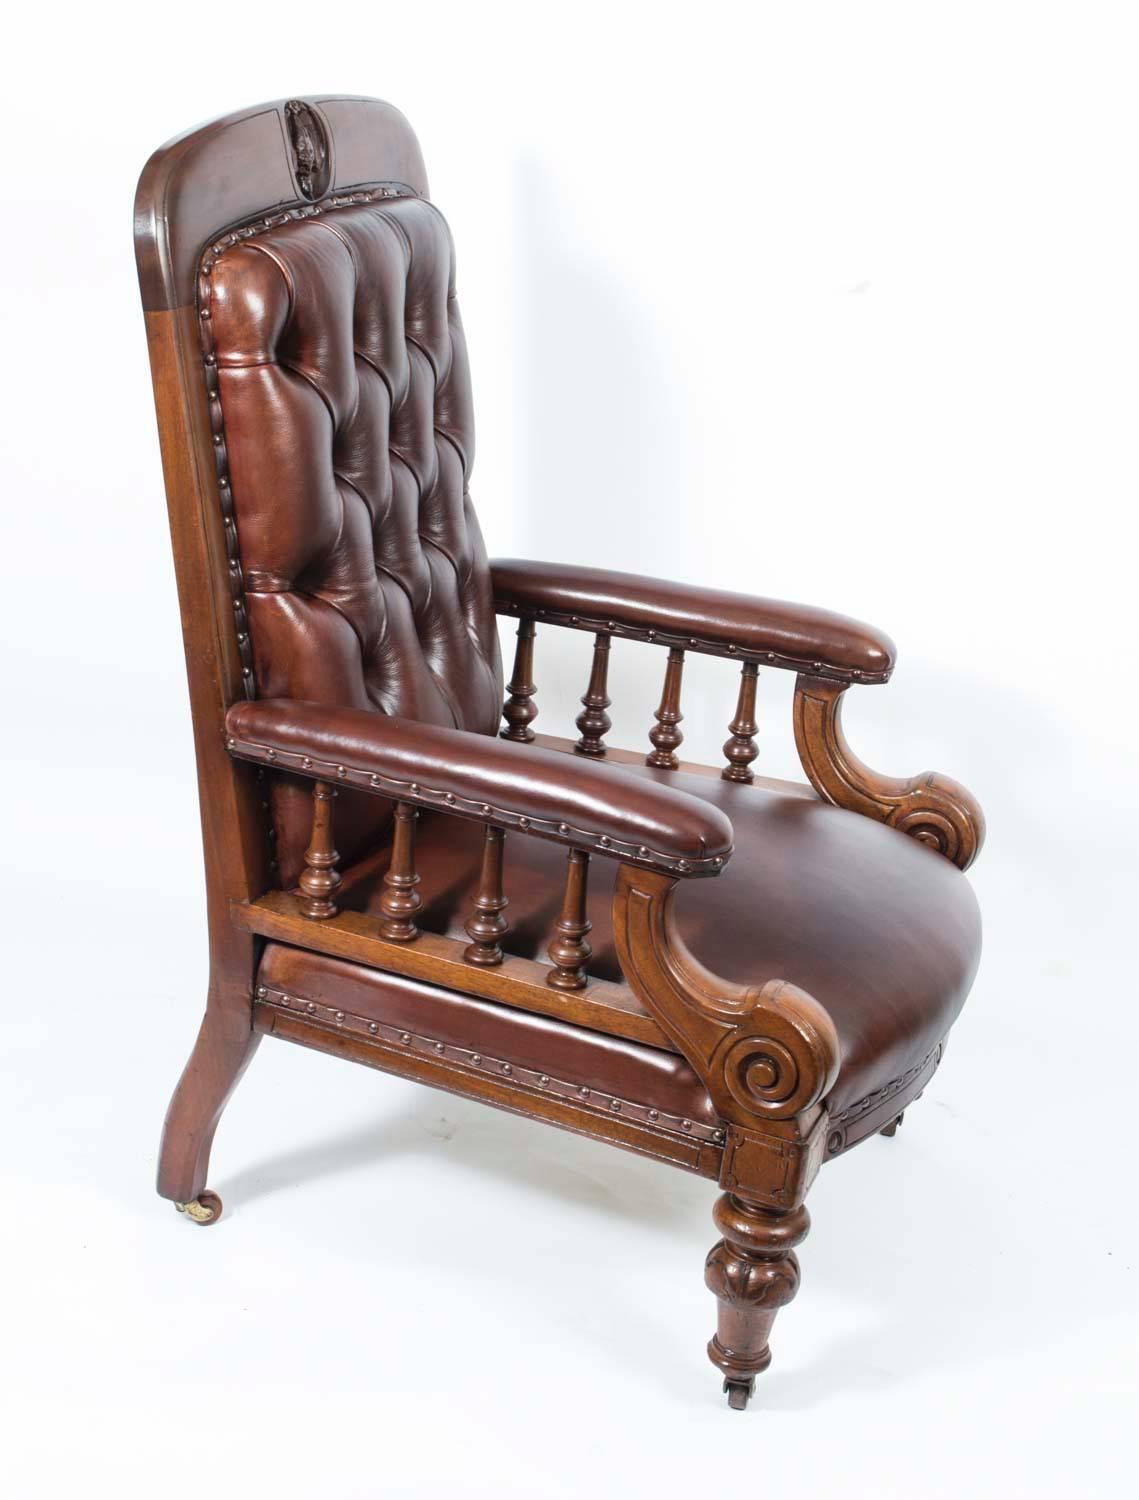 This is a handsome pair of antique Victorian mahogany and leather club armchairs, circa 1880 in date.

This lovely pair was made from masterly crafted hand-carved solid mahogany with an interesting hand-carved crest of a bird on top of each.

They